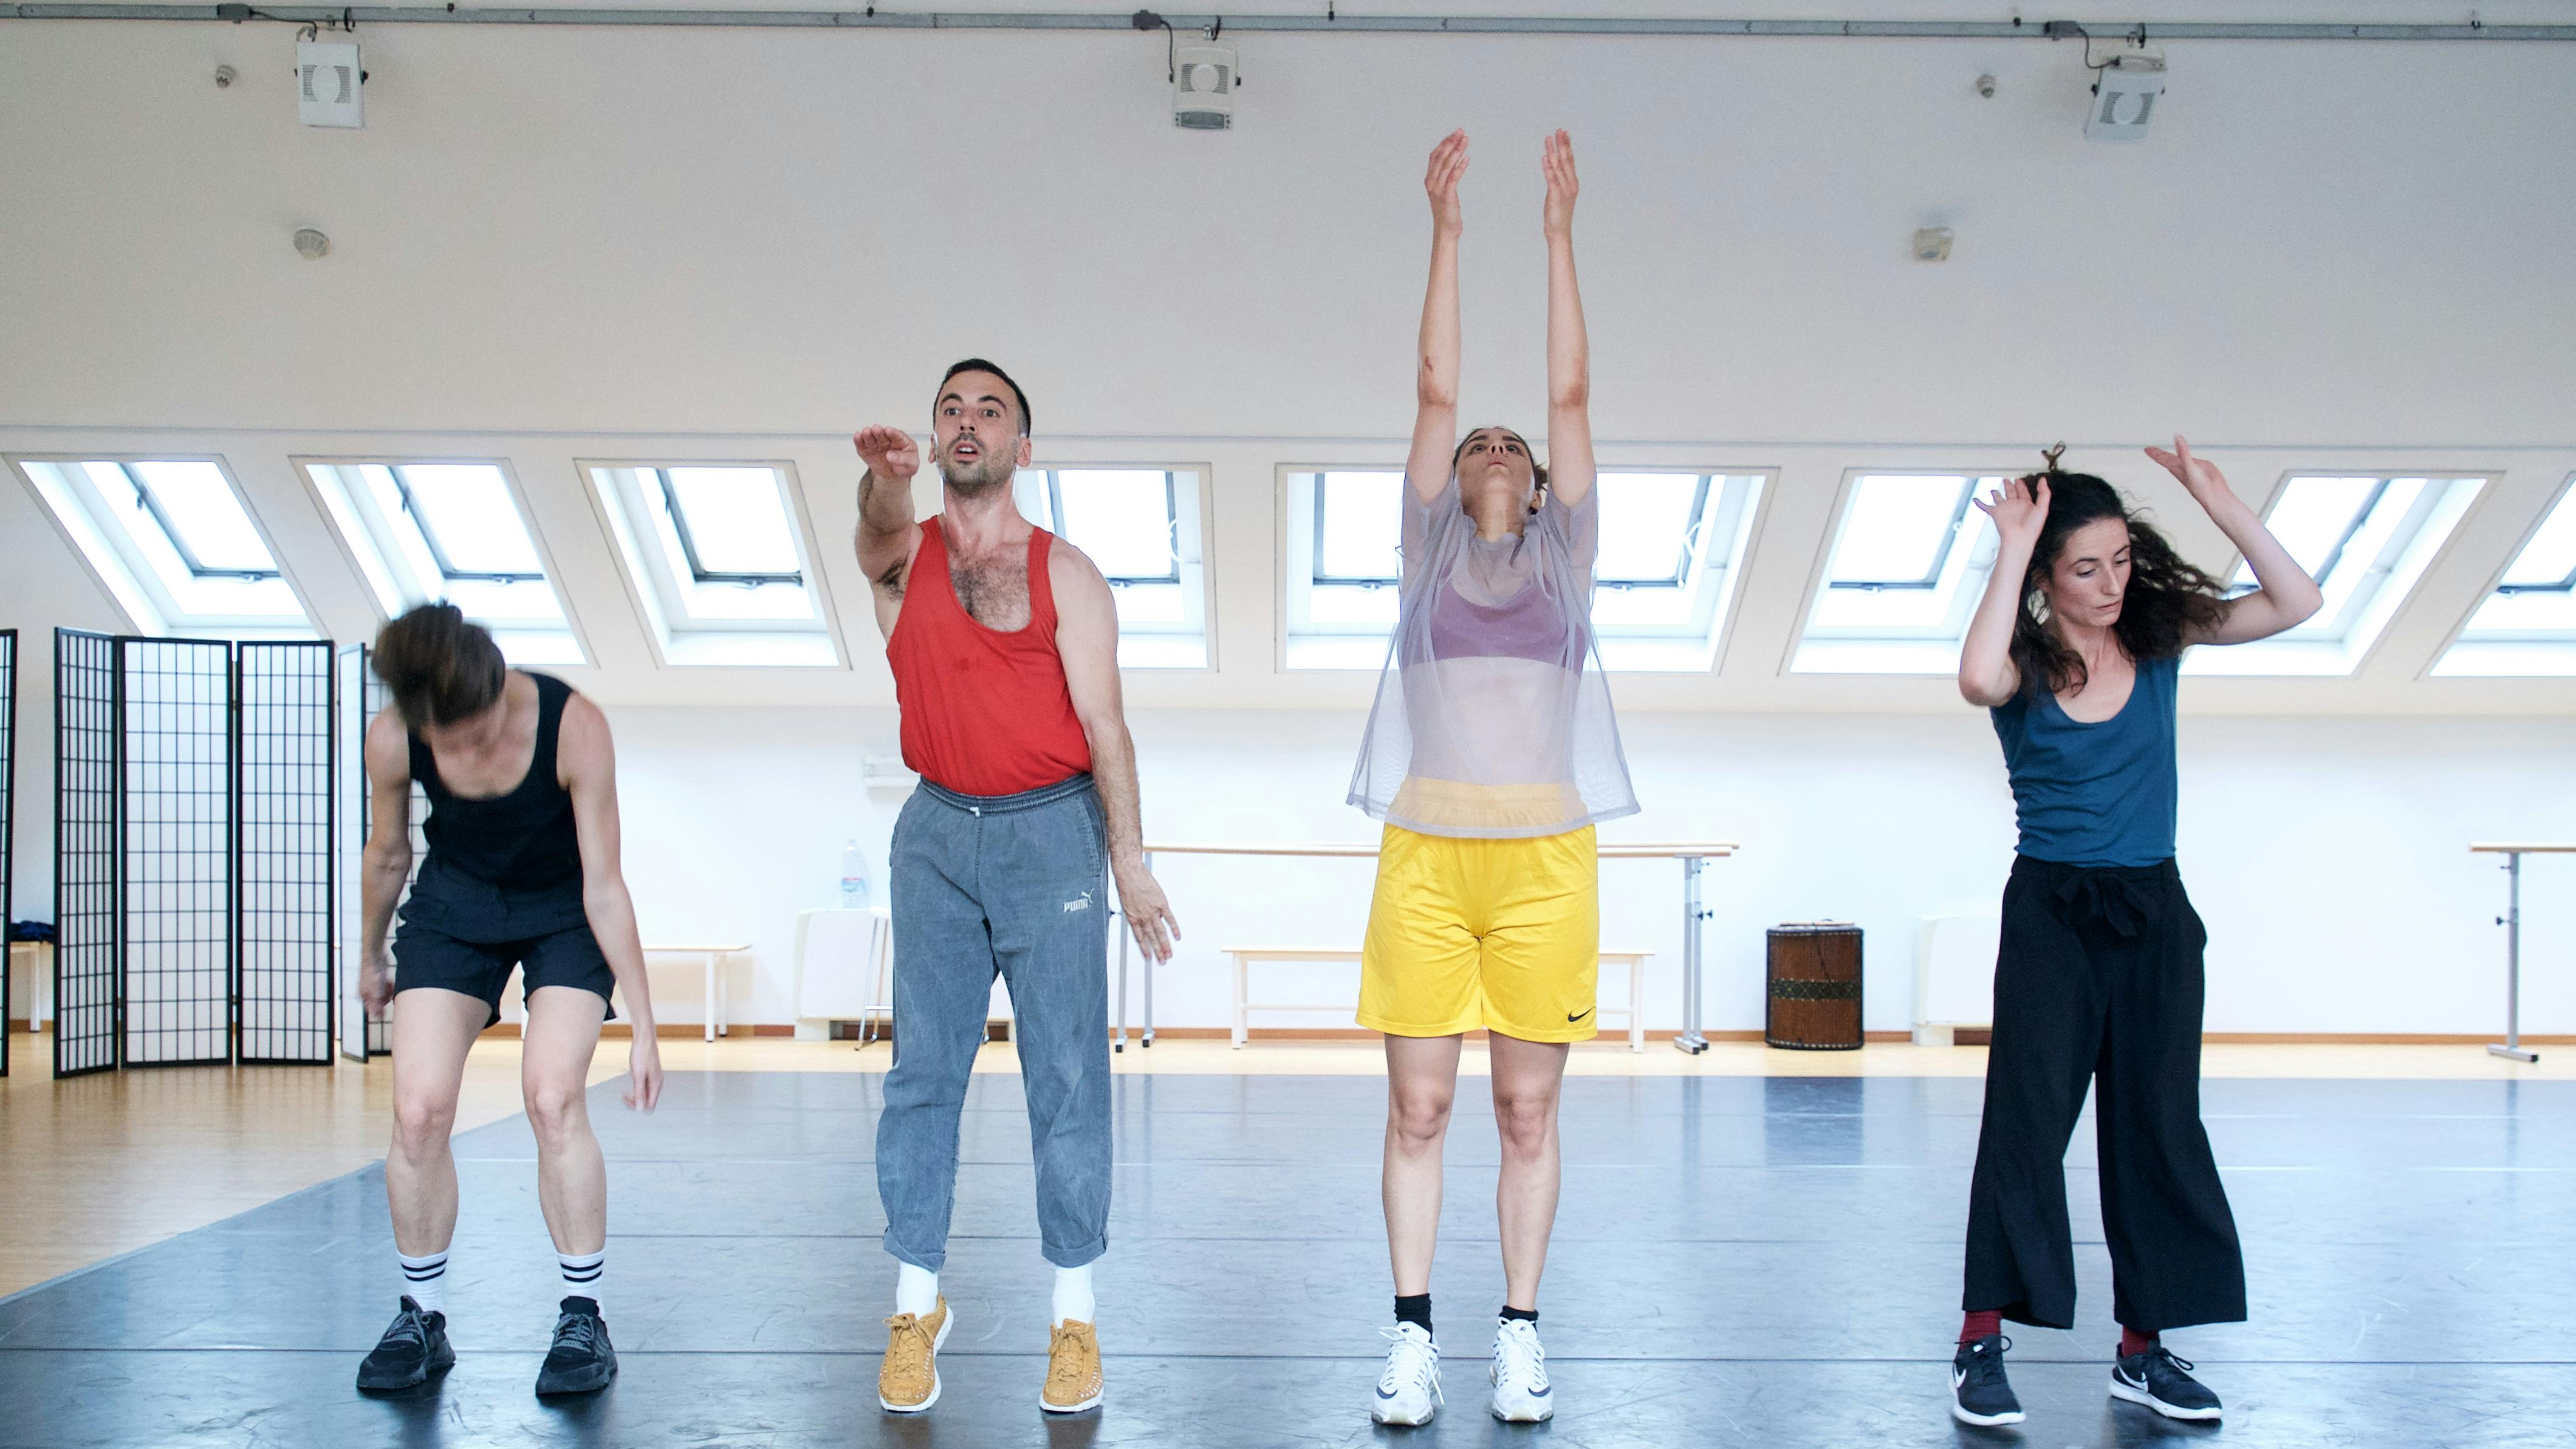 Four performers in a horizontal row in the Studio make different movements with their arms